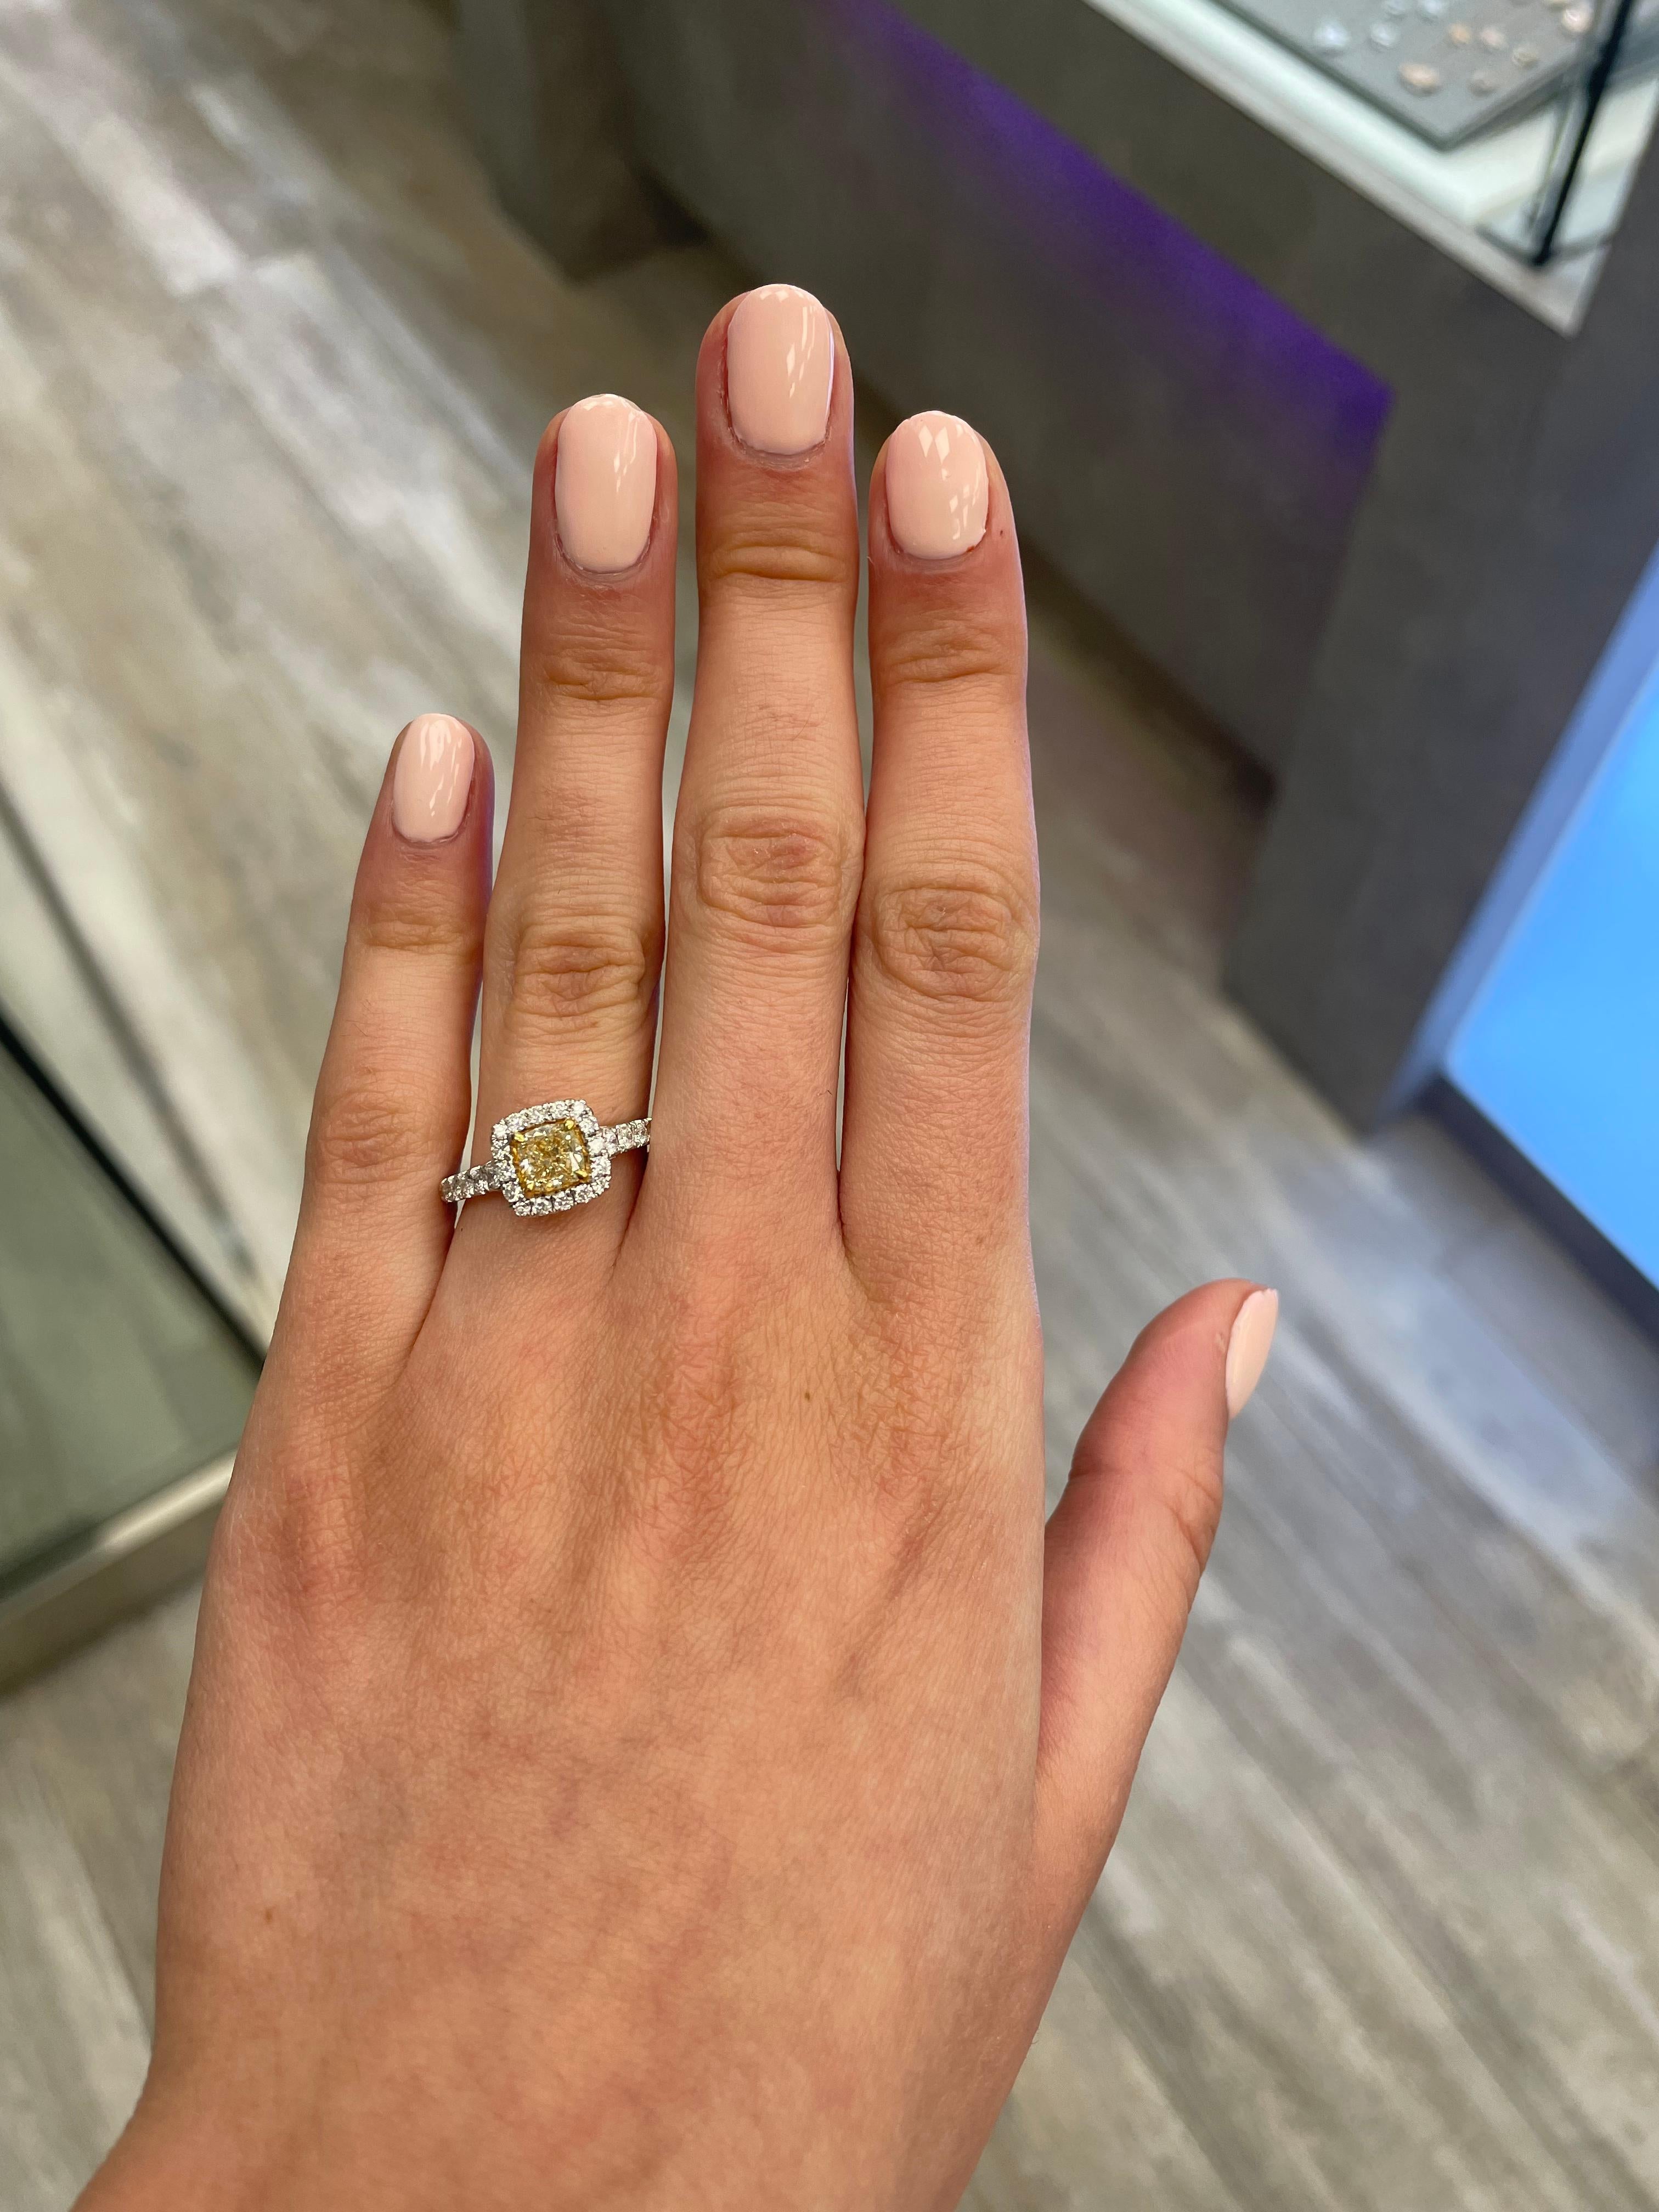 Stunning modern EGL certified yellow diamond with halo ring, two-tone 18k yellow and white gold. By Alexander Beverly Hills
1.63 carats total diamond weight.
1.02 carat cushion cut Fancy Intense Yellow color and SI1 clarity diamond, EGL graded.